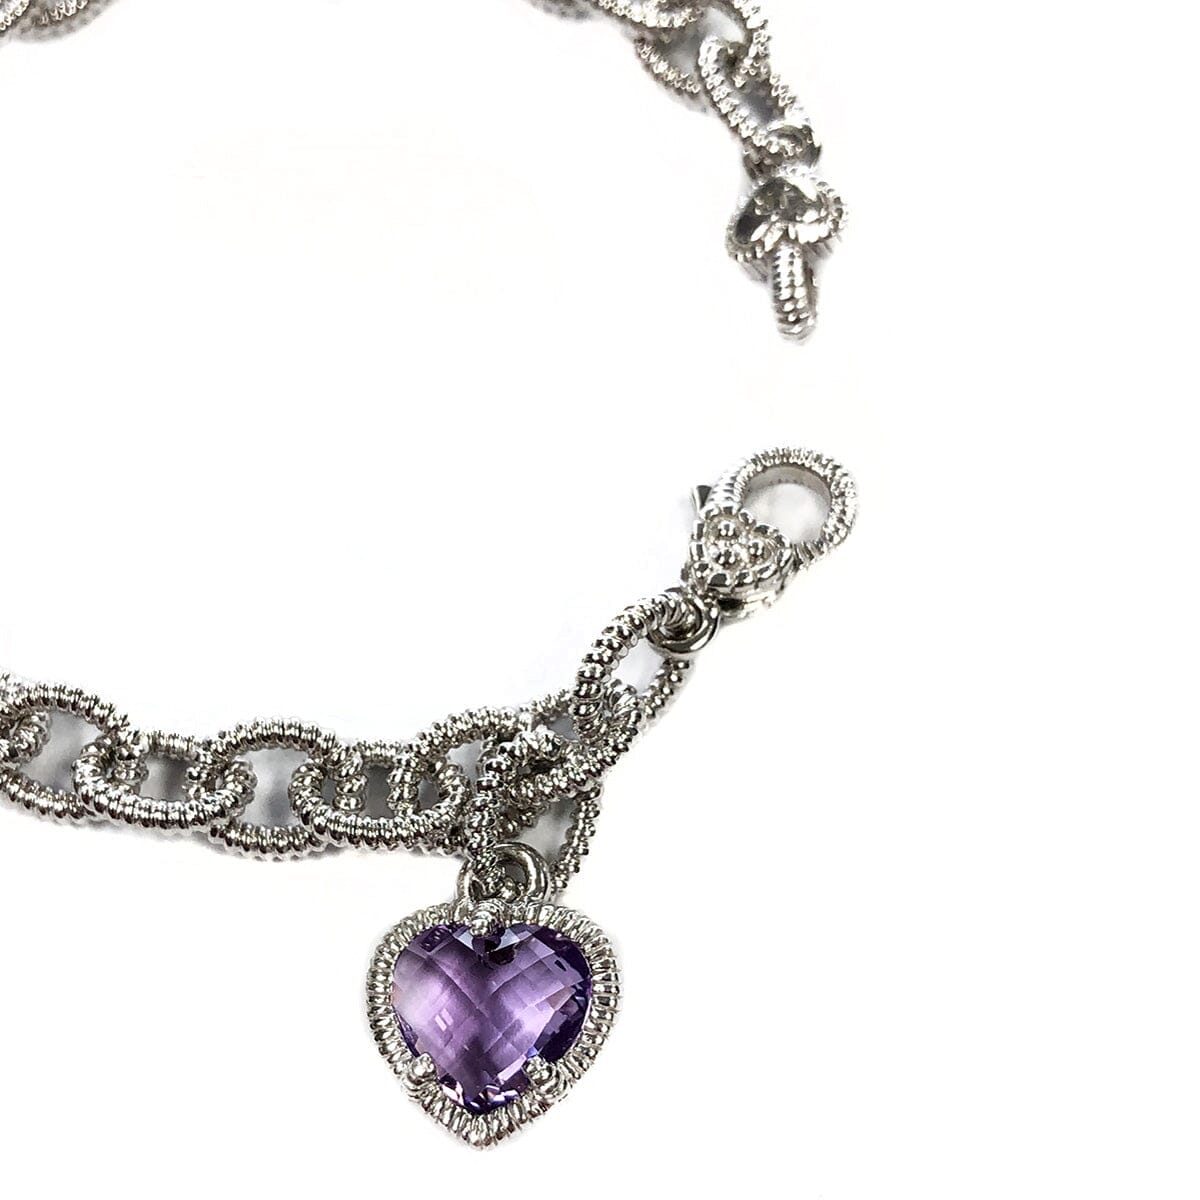 Great Lakes Coin Judith Ripka Chain Link Bracelet with Amethyst